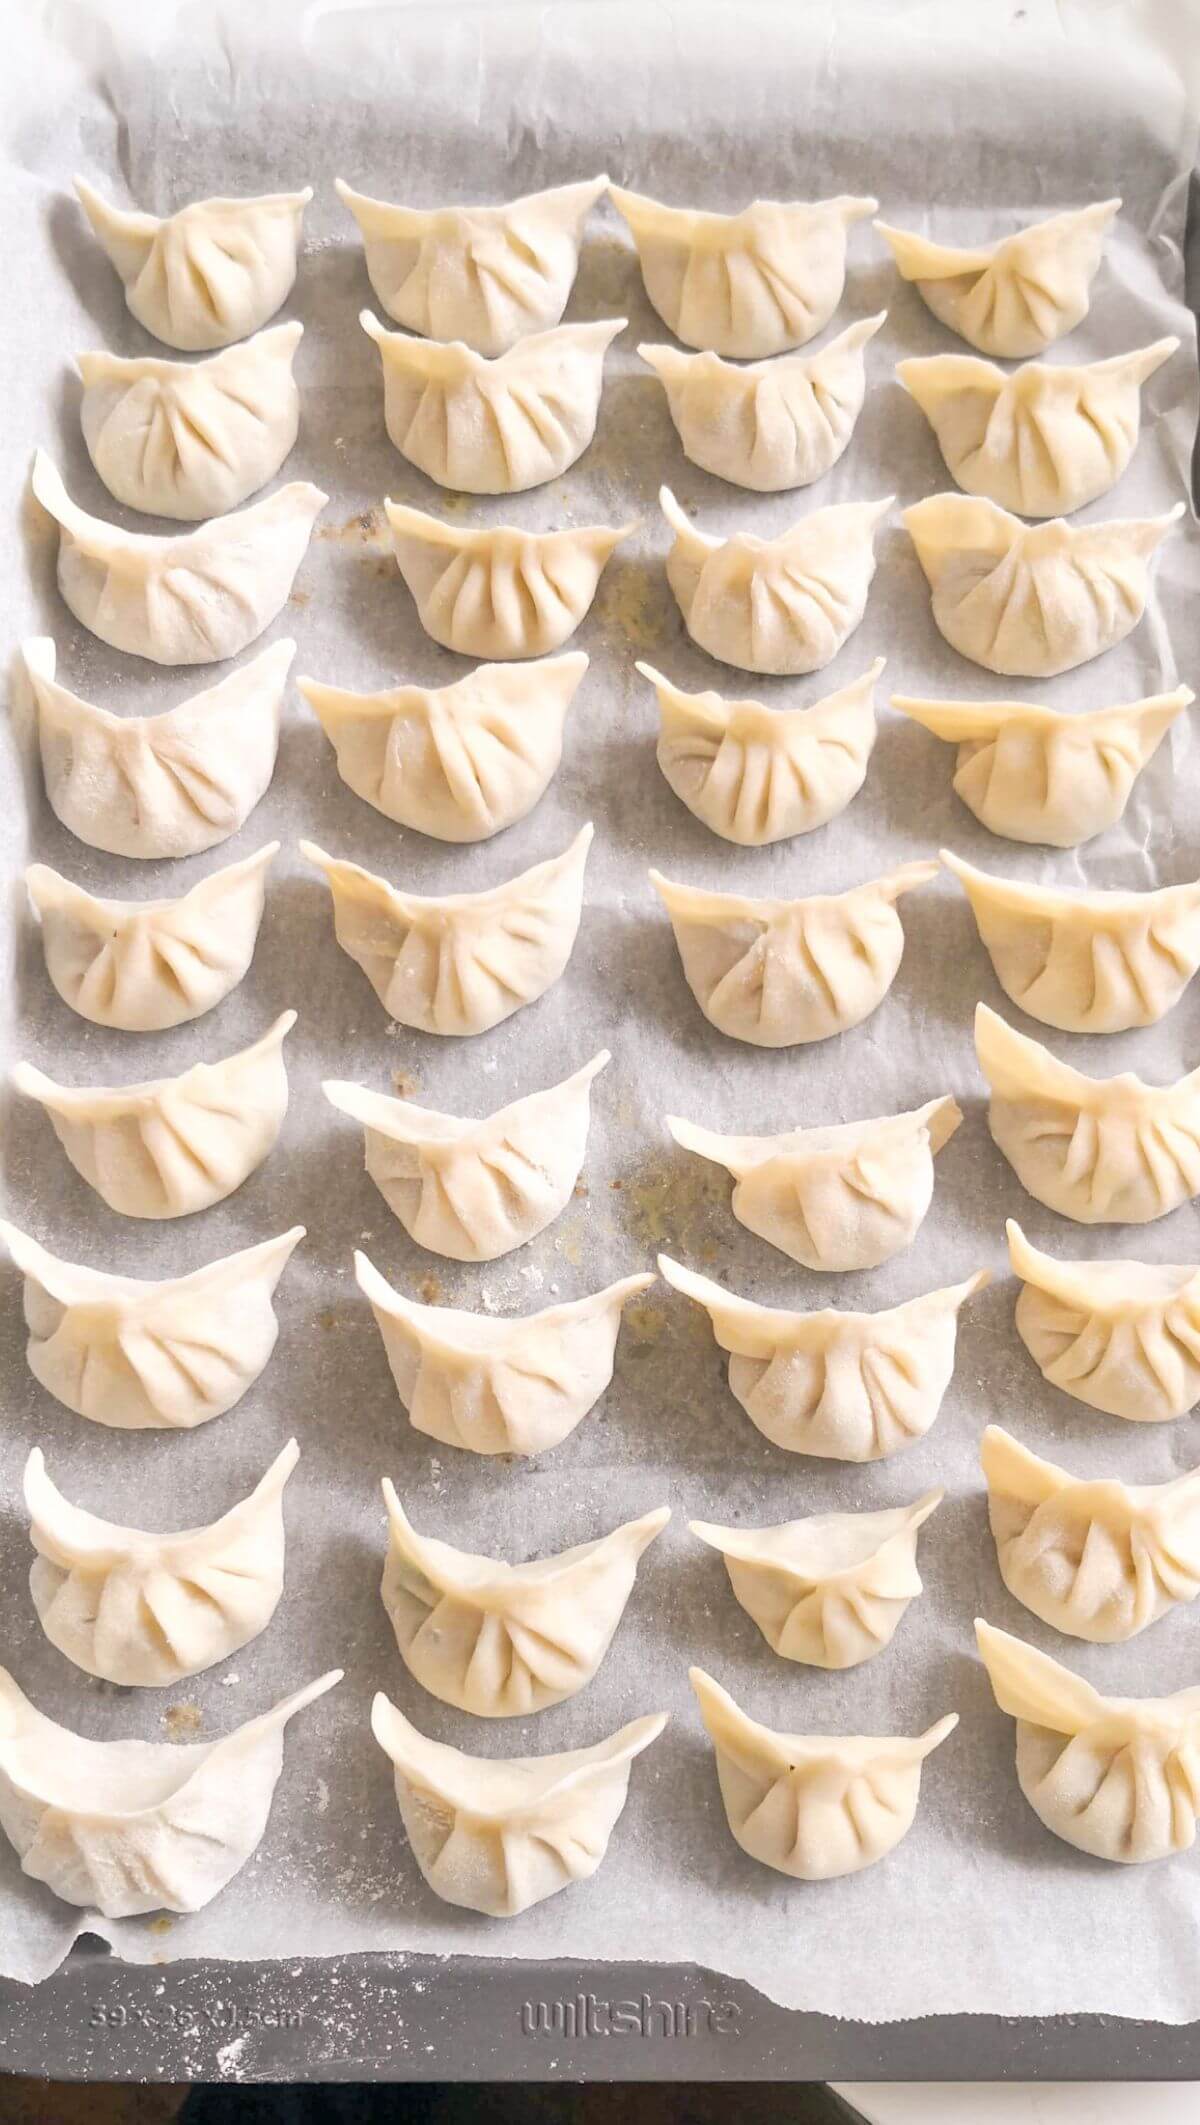 Dumplings laid out on a lined baking tray.